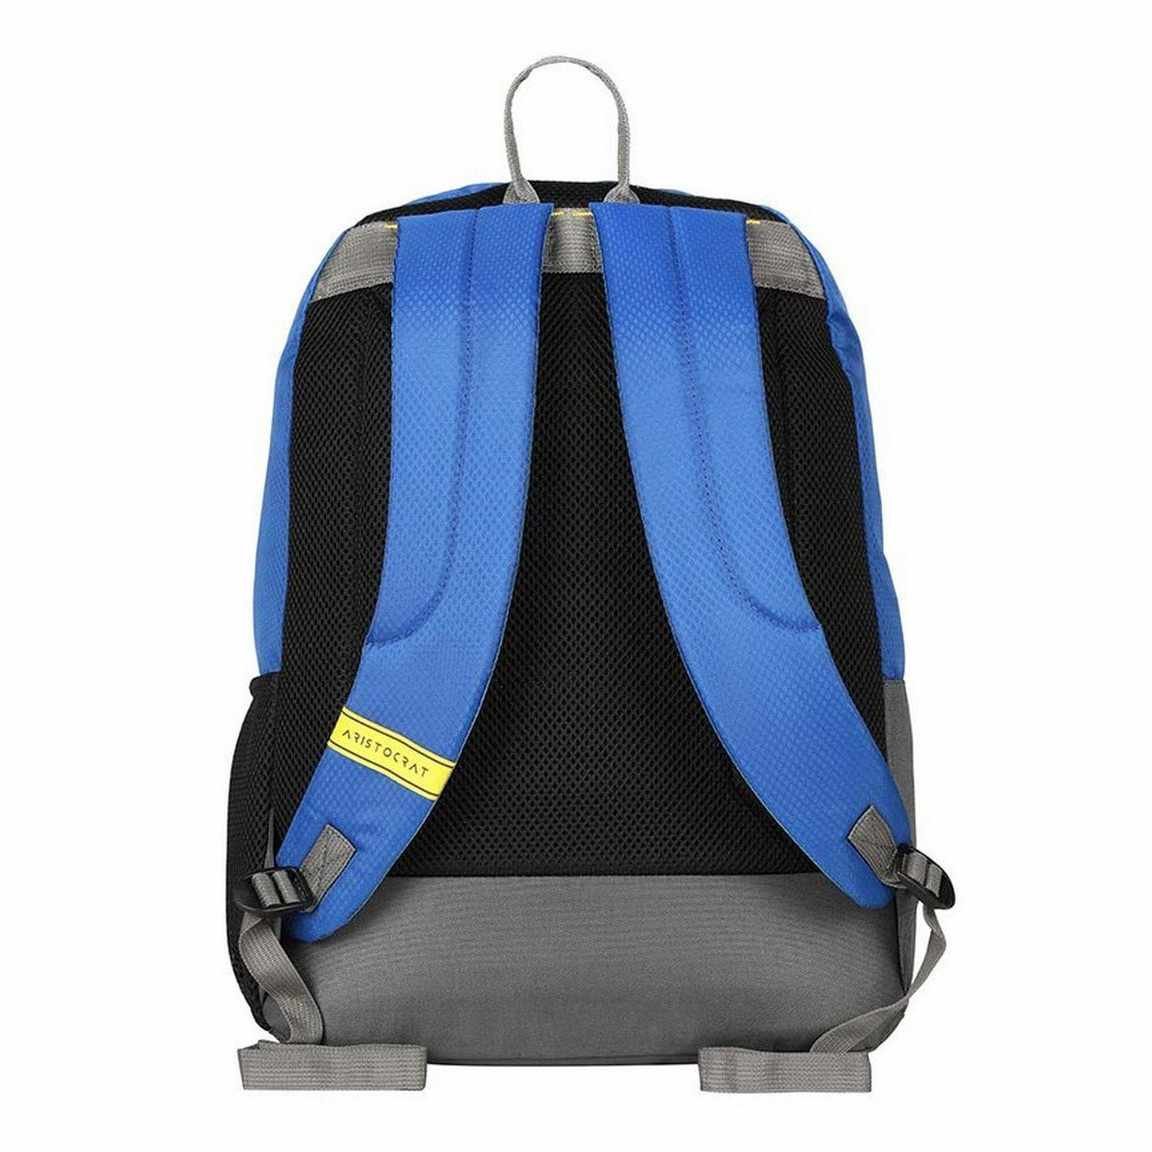 Buy Aristocrat Pro 2 35 Ltrs Royal Blue Casual Backpack (BPPRO2HRBL) at  Amazon.in